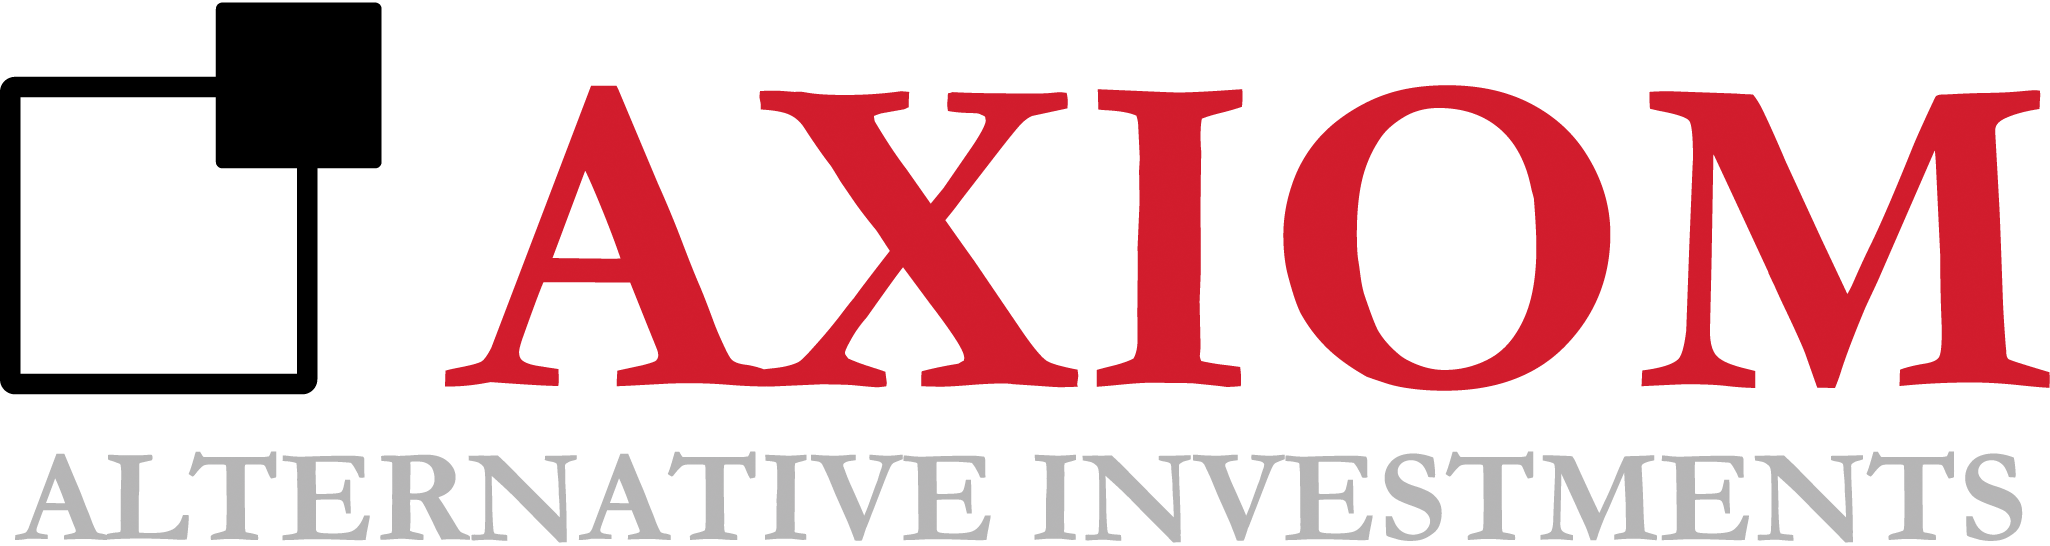 Display Image of Axiom Alternative Investments